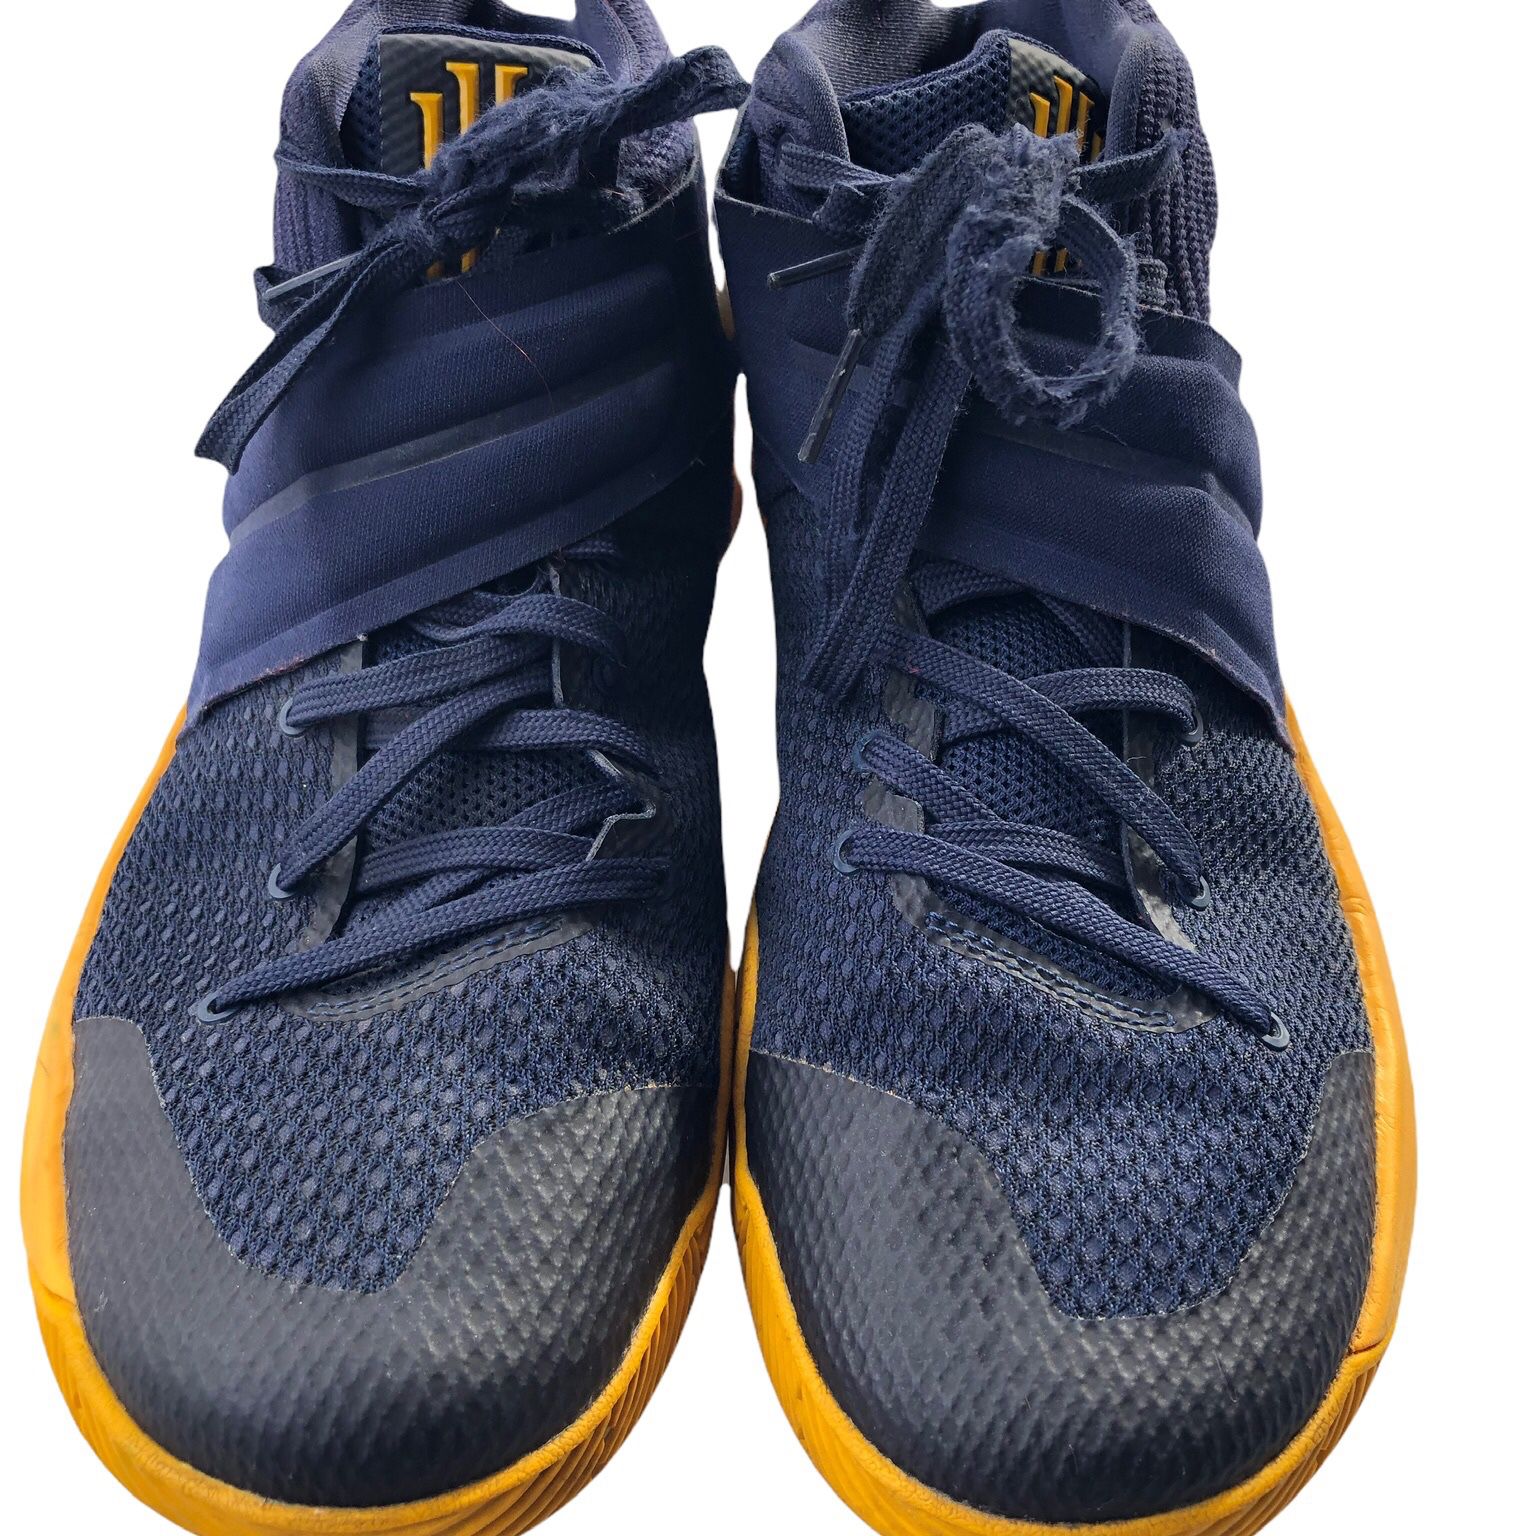 conformidad silencio absceso NIKE KYRIE 2 CAVS PLAYOFFS 2016 BASKETBALL SHOES SIZE 10.5NAVY YELLOW  819583 447 for Sale in Las Vegas, NV - OfferUp